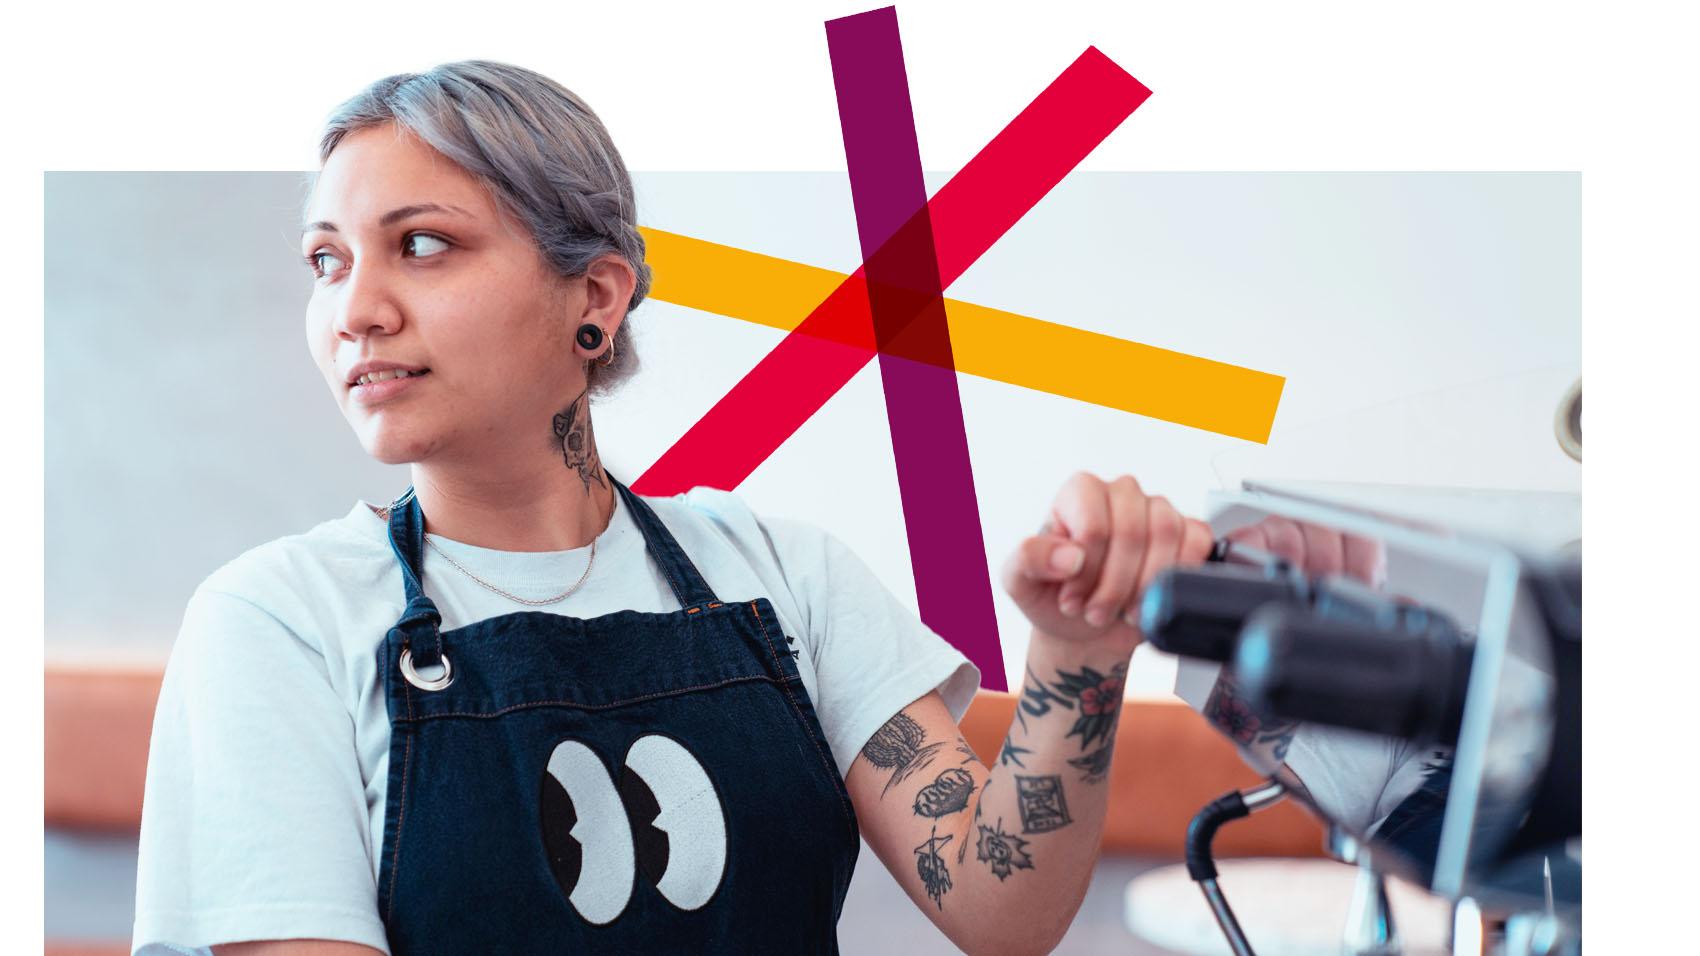 A woman with tattoos is using a coffee machine in a cafe 